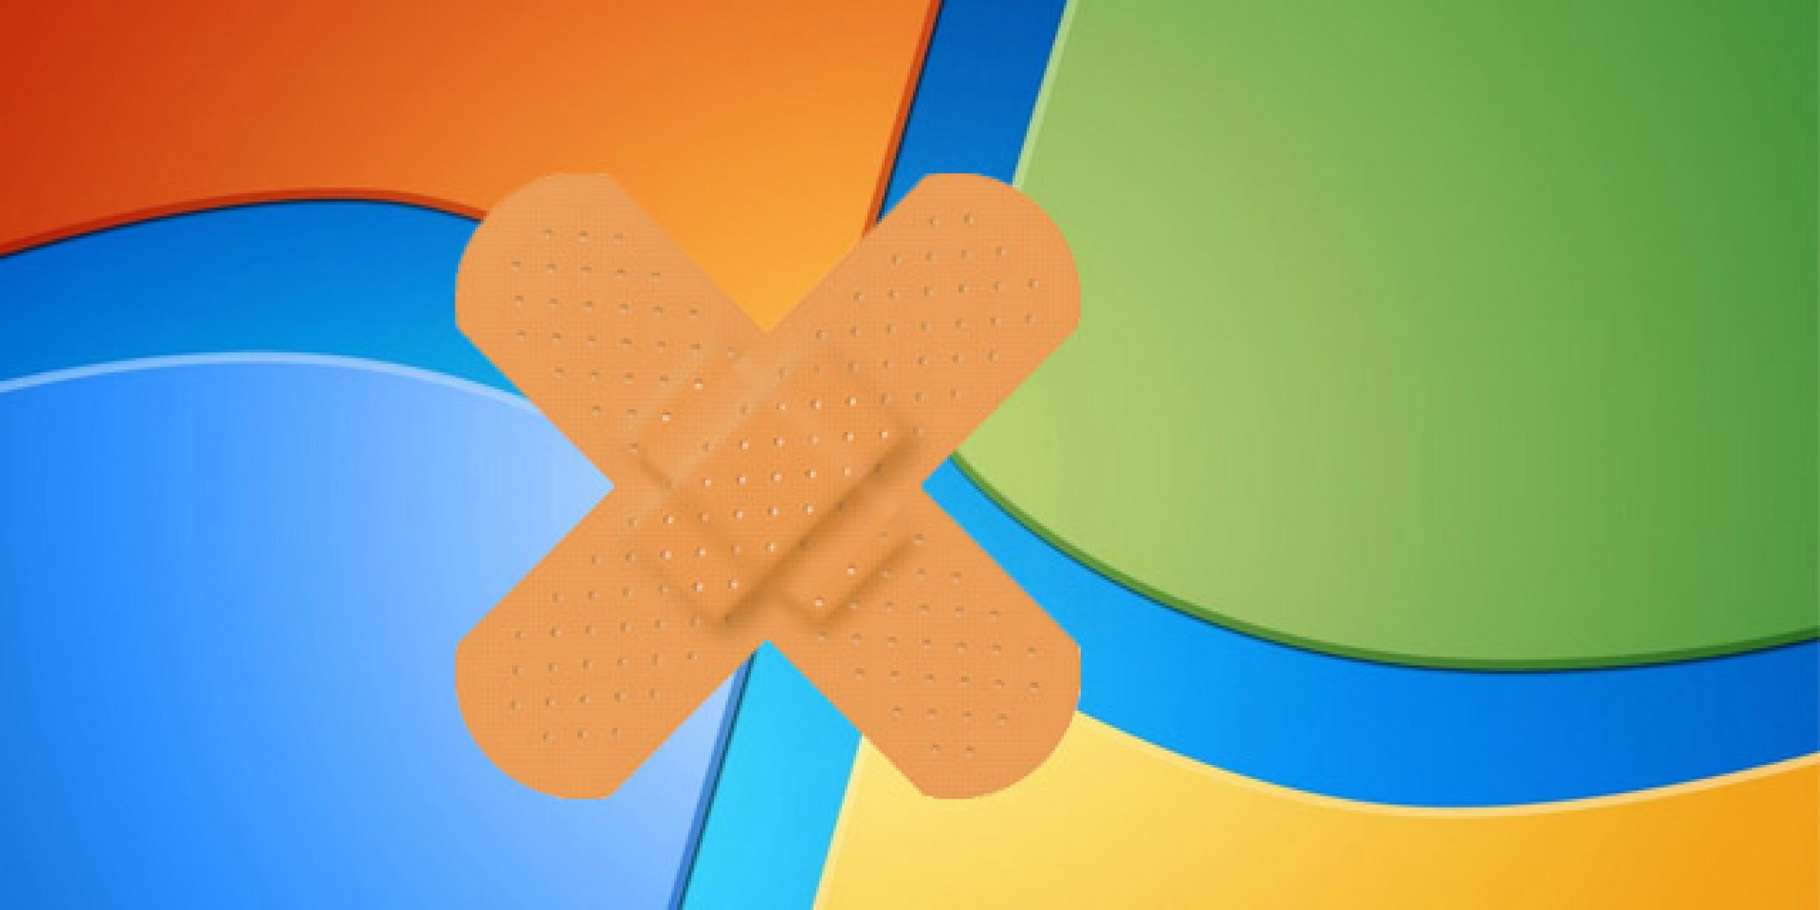 patches for 44 Microsoft vulnerabilities